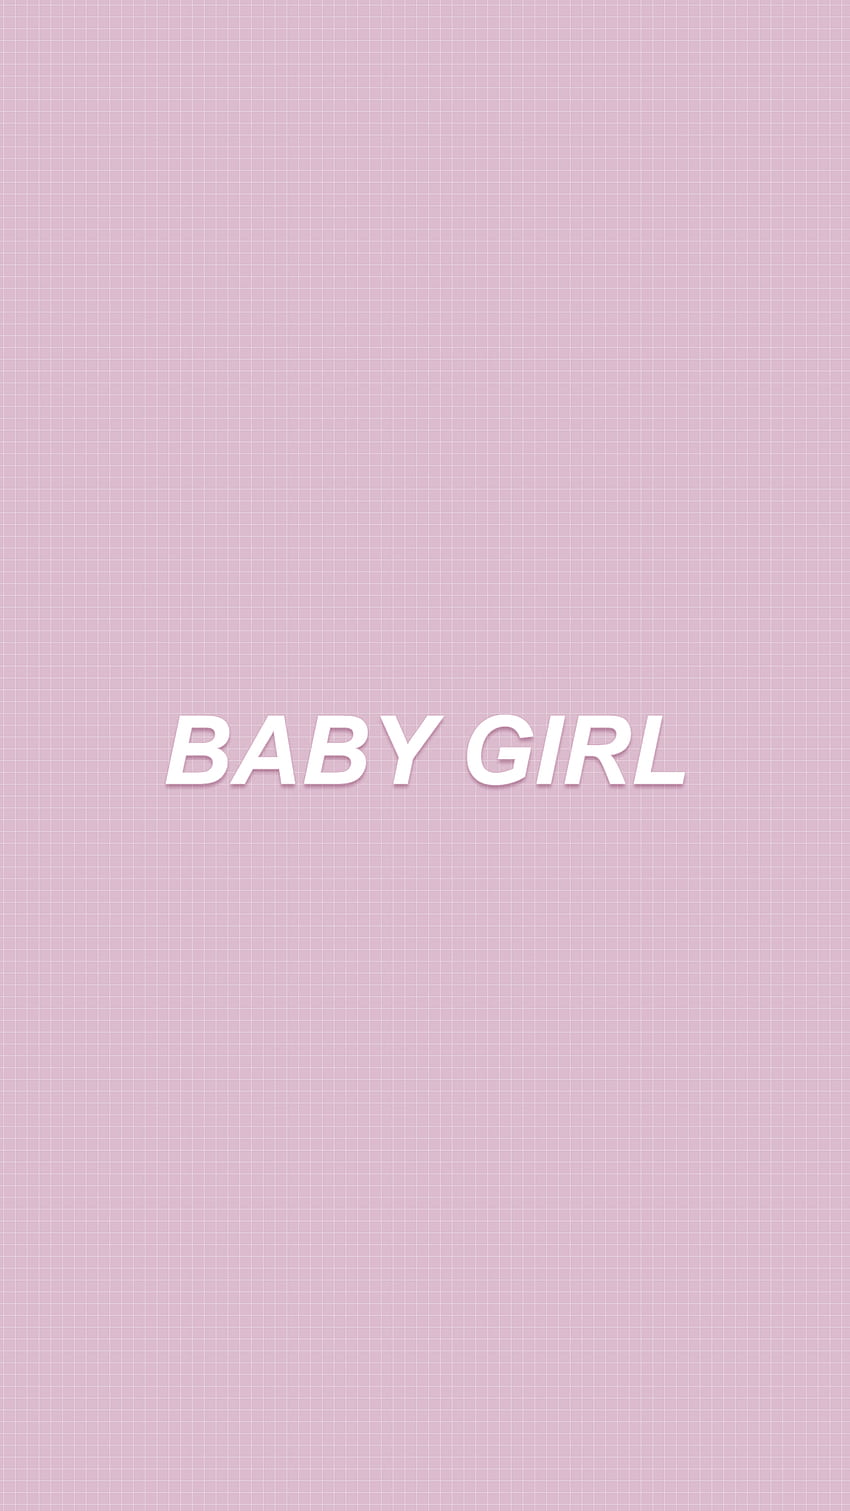 Baby Girl Aesthetic - Top Baby Girl Aesthetic Background - Baby pink ...